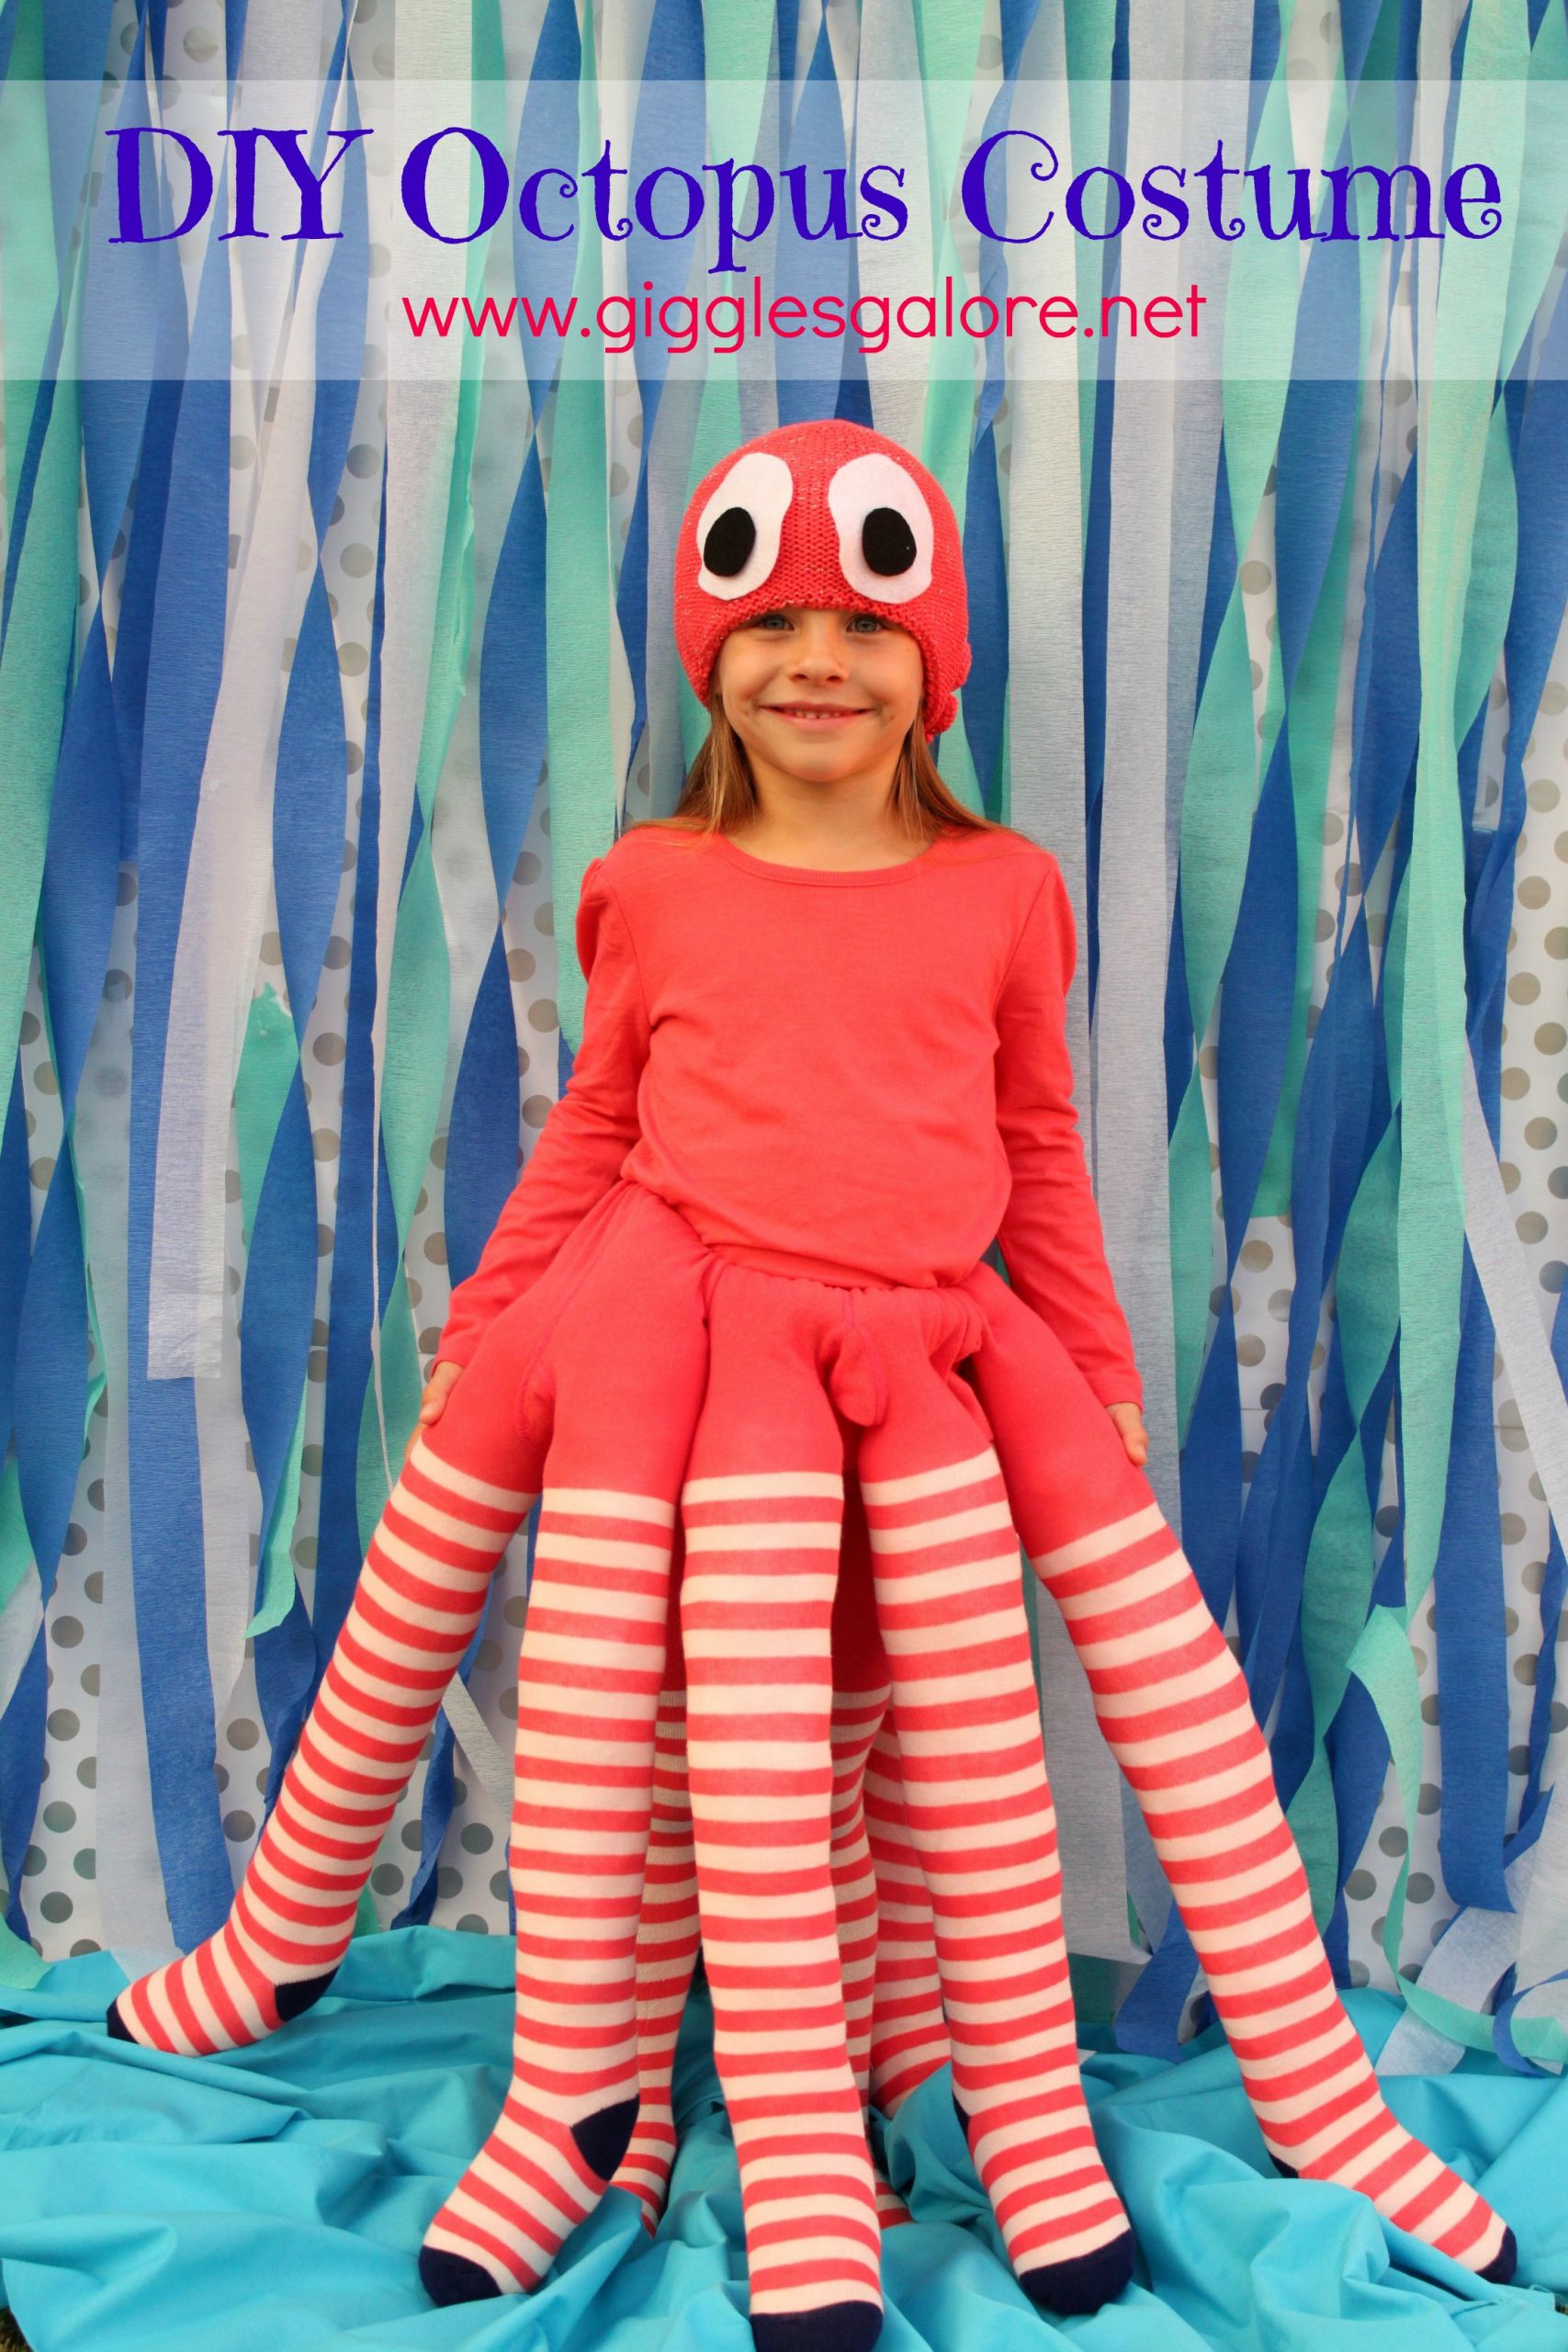 DIY Toddler Costumes
 Hot to Make a DIY Octopus Costume For Kids